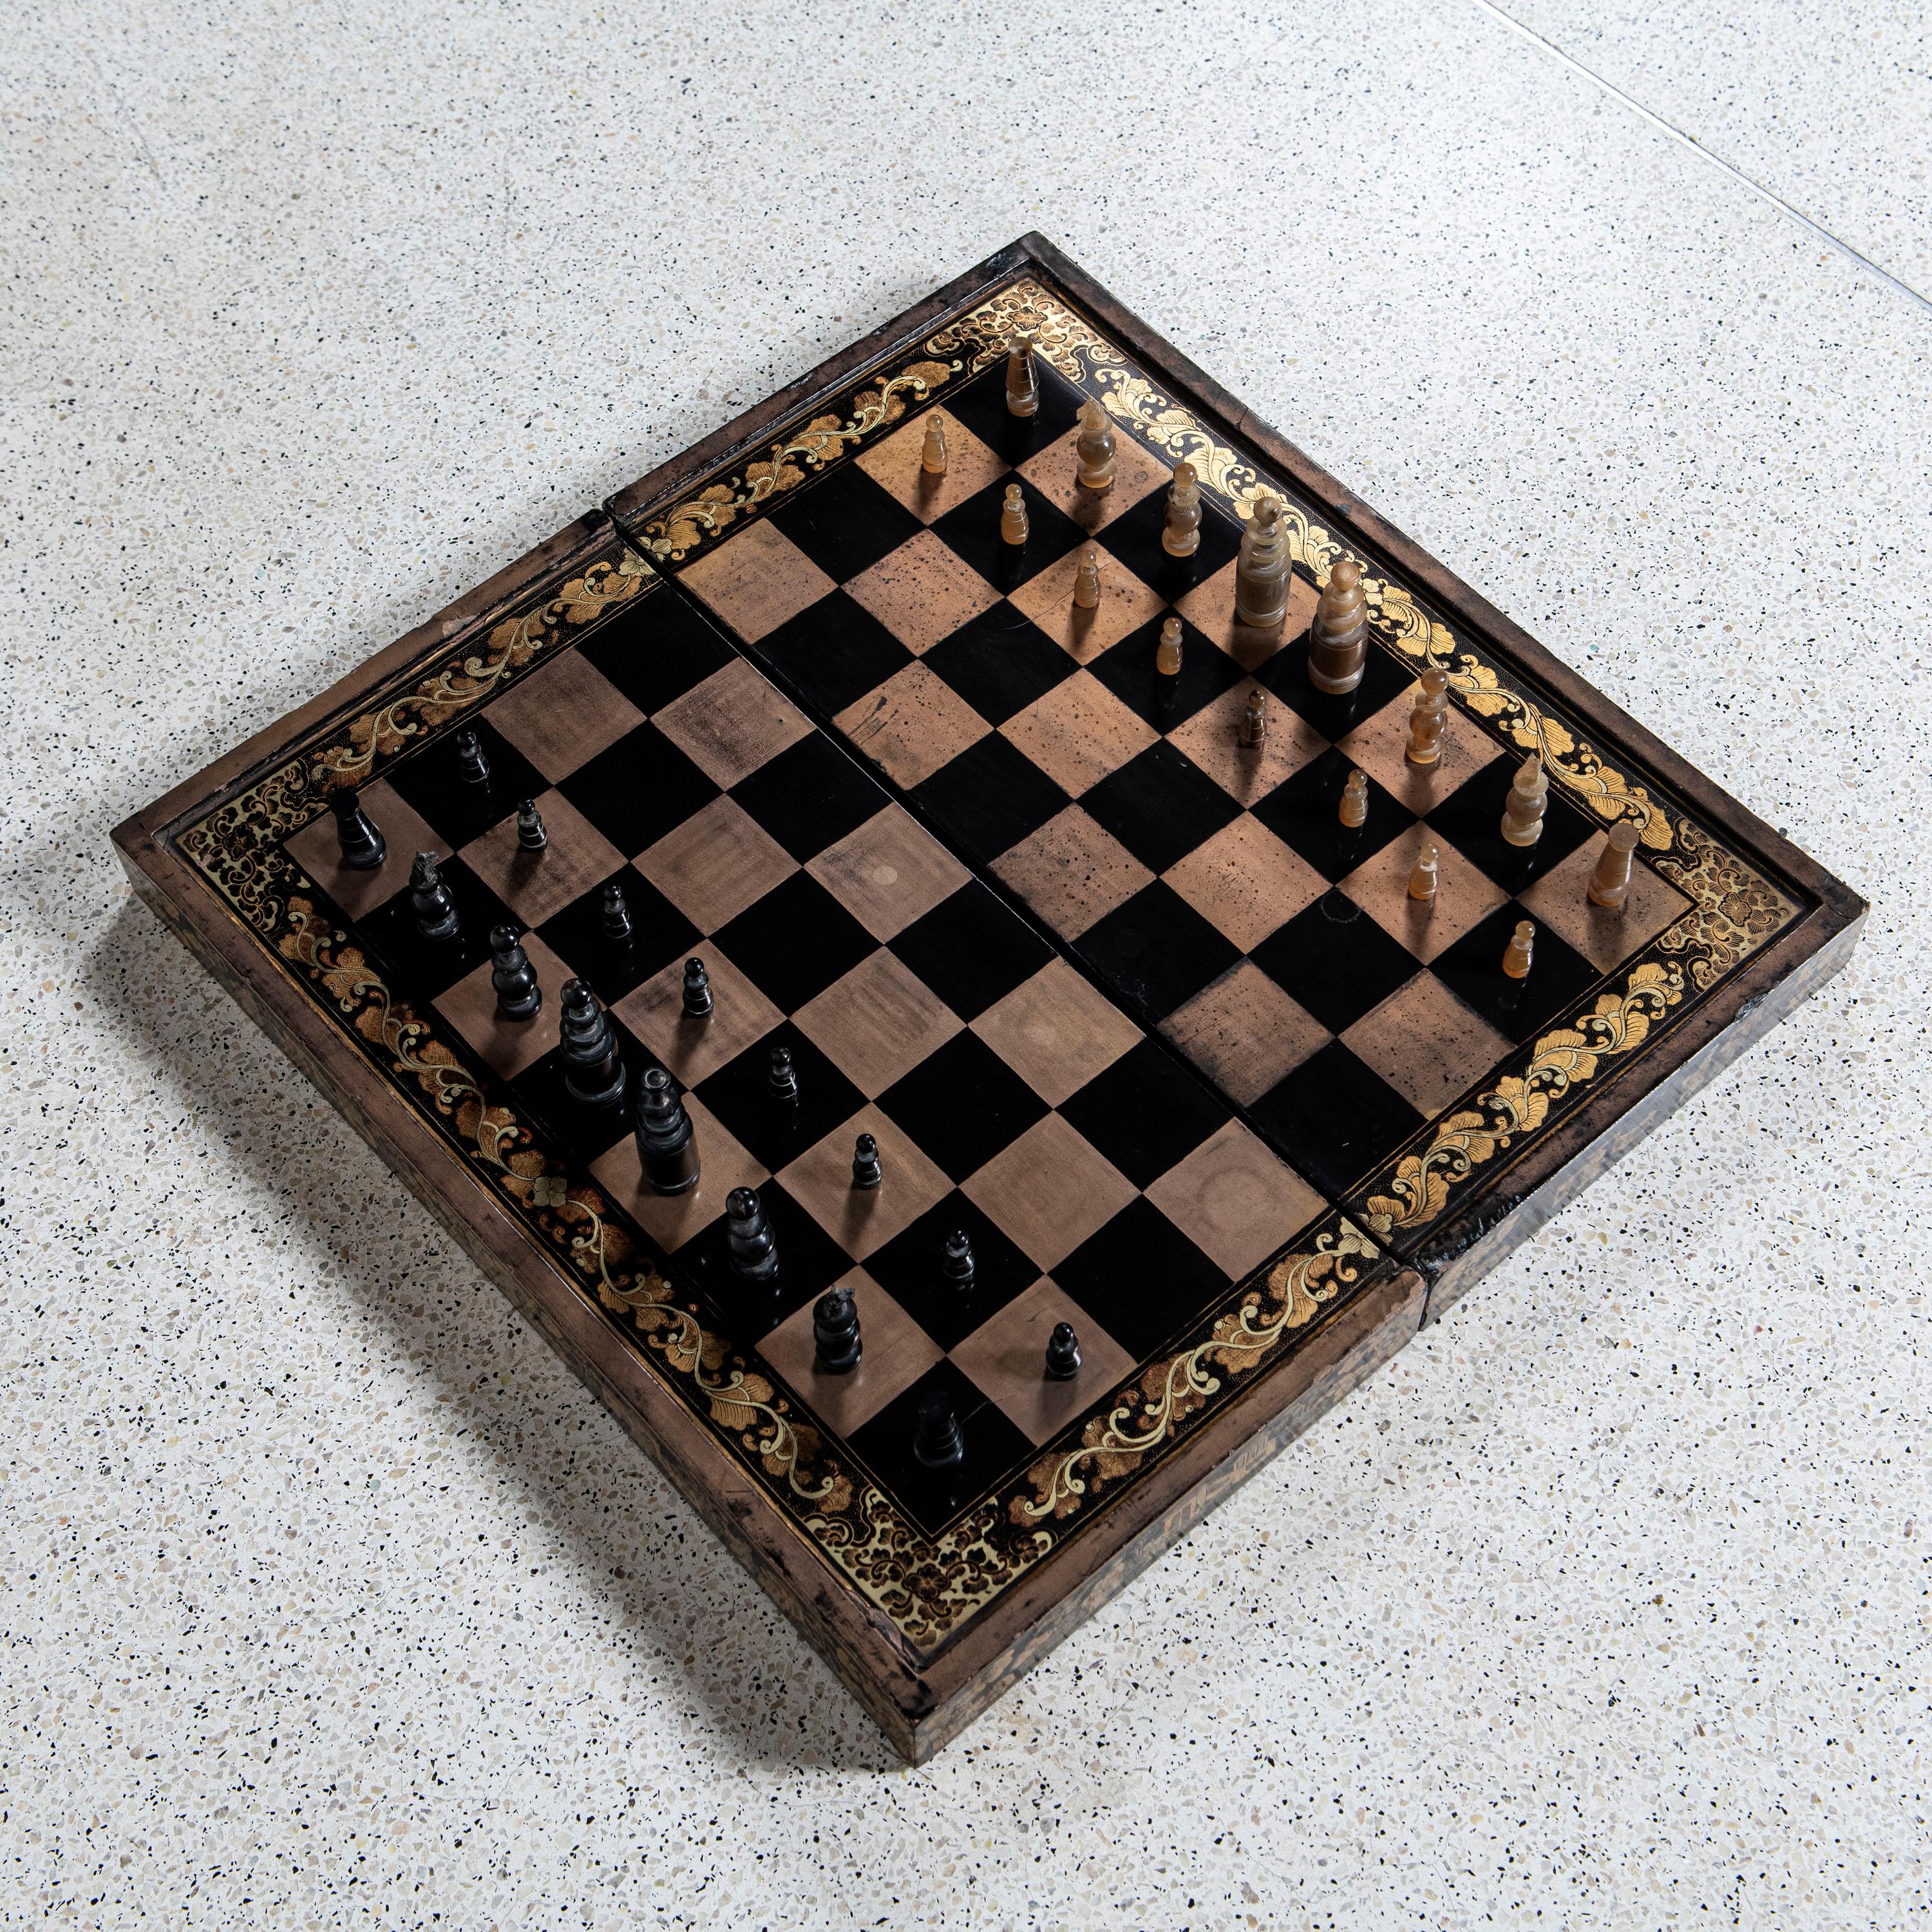 Chess and backgammon lacquered wood board. China, late 19th century.